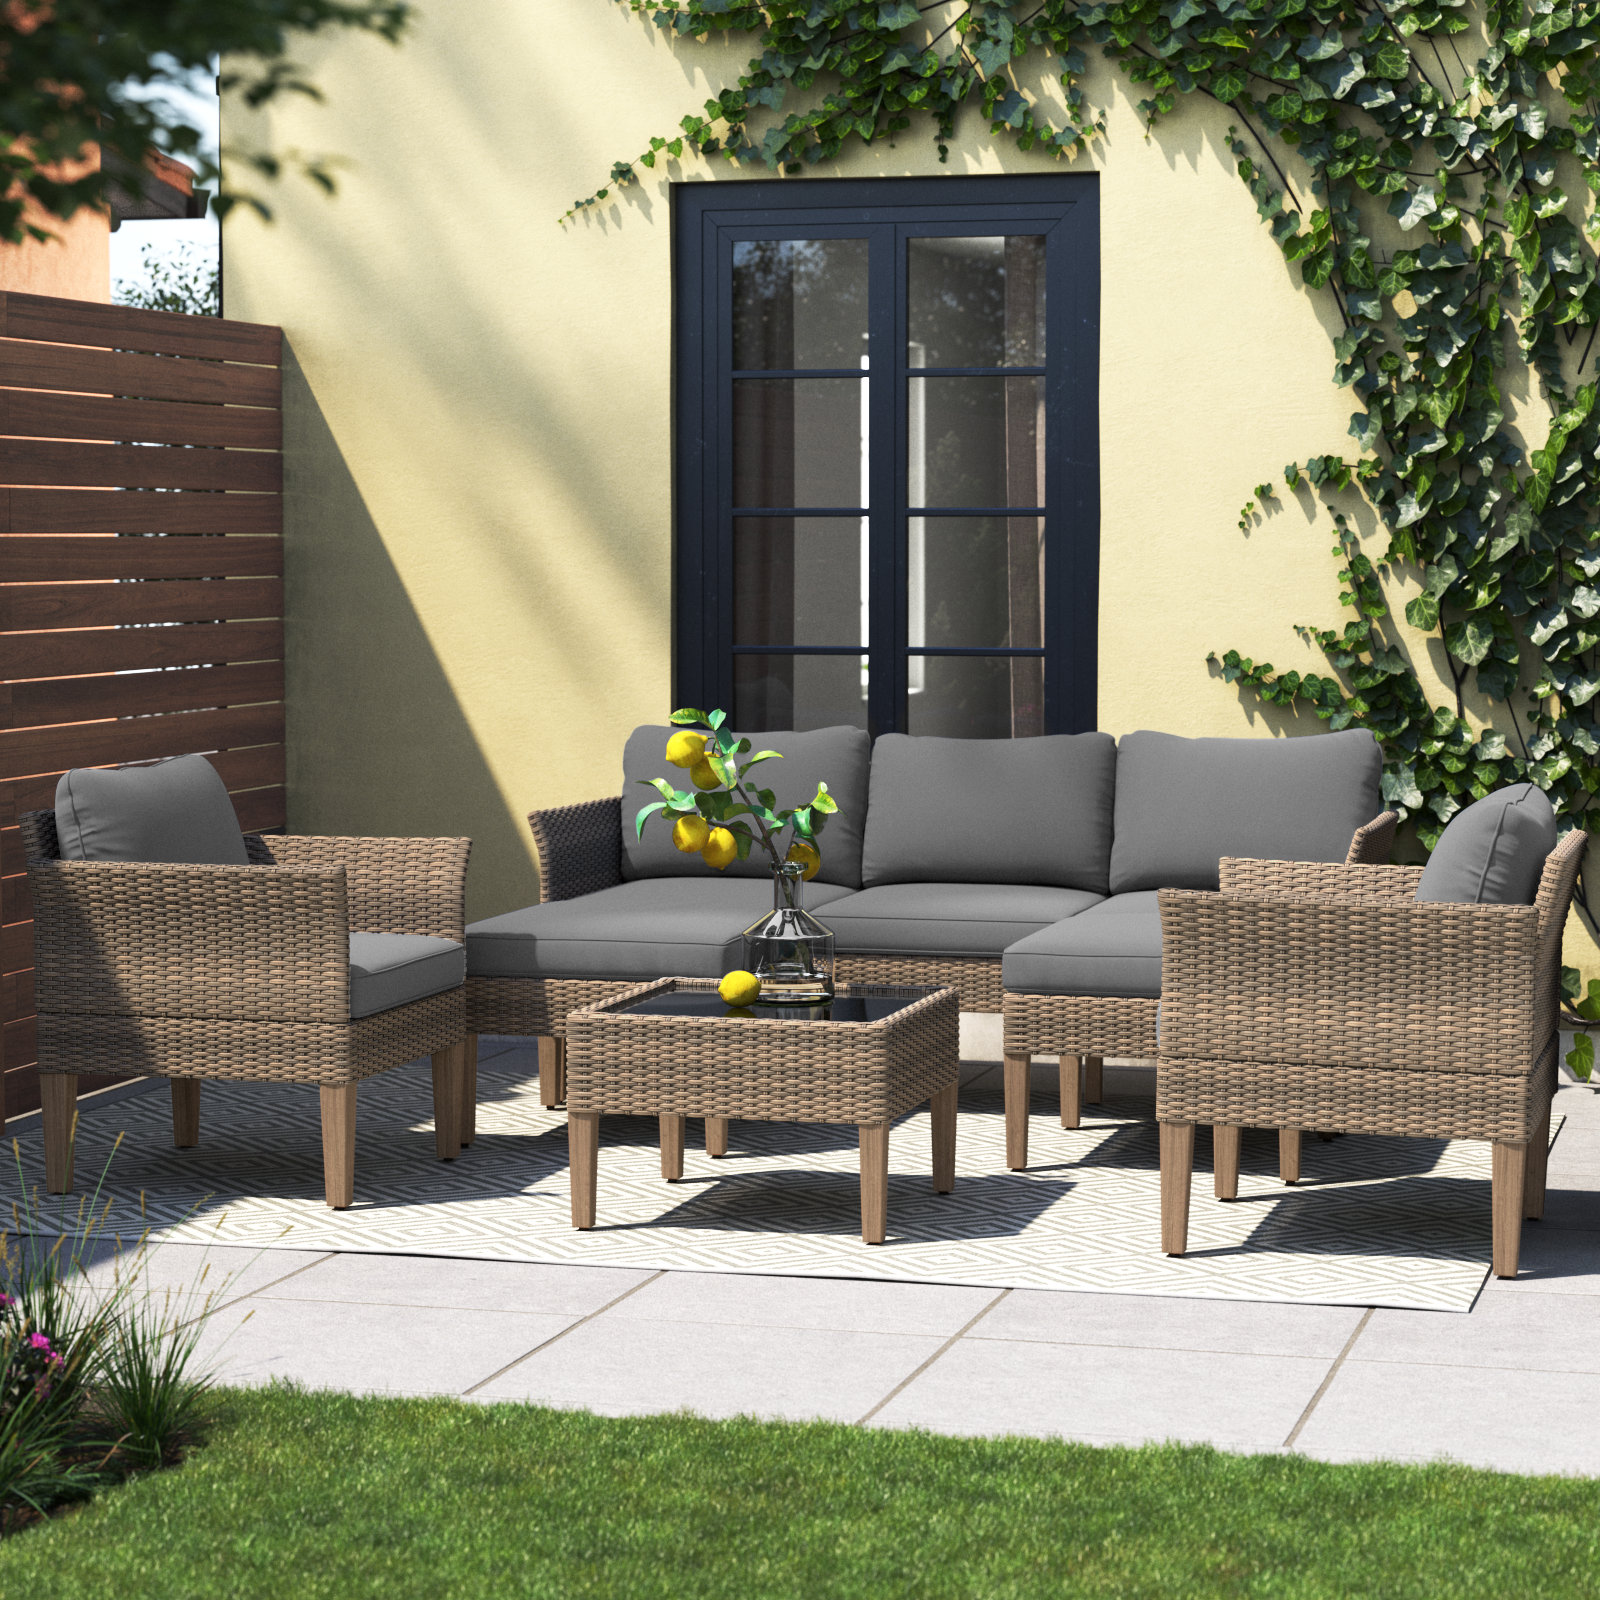 Annancy 6-Piece Outdoor Conversation Set with Sofa and Club Chairs in Mixed Brown Wicker (Set of 6) Lark Manor Cushion Color: Stone